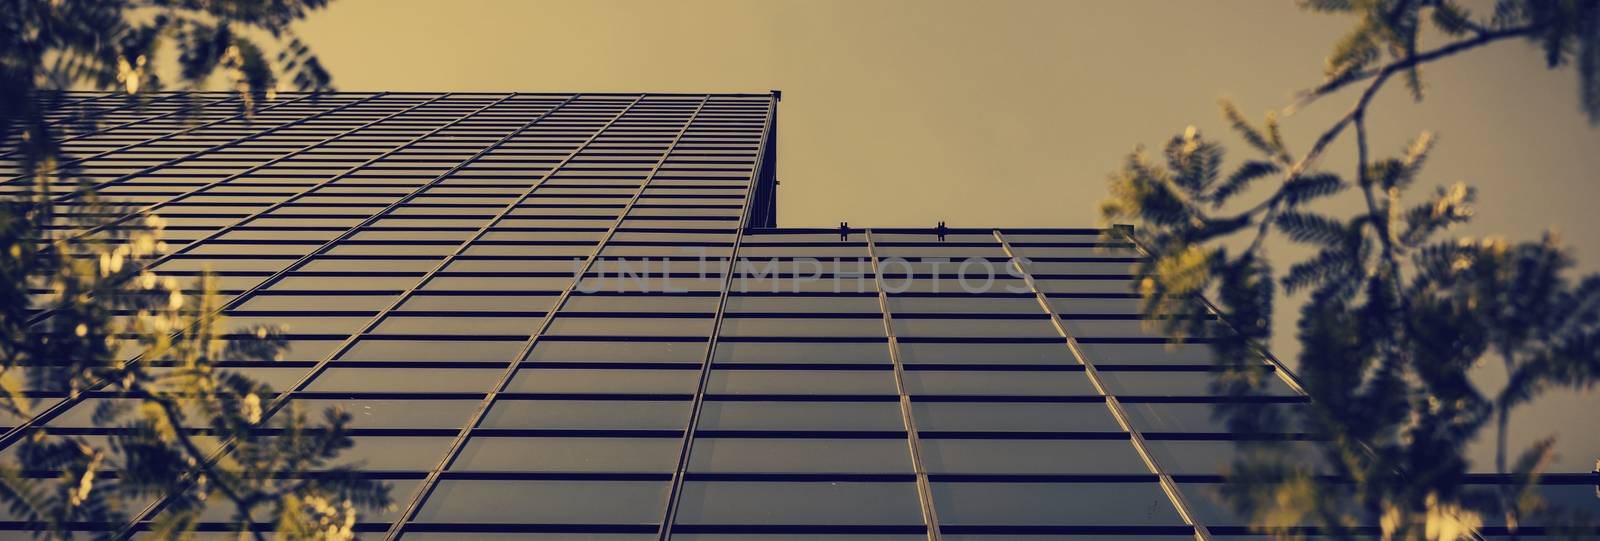 Low angle view of office building by Wavebreakmedia